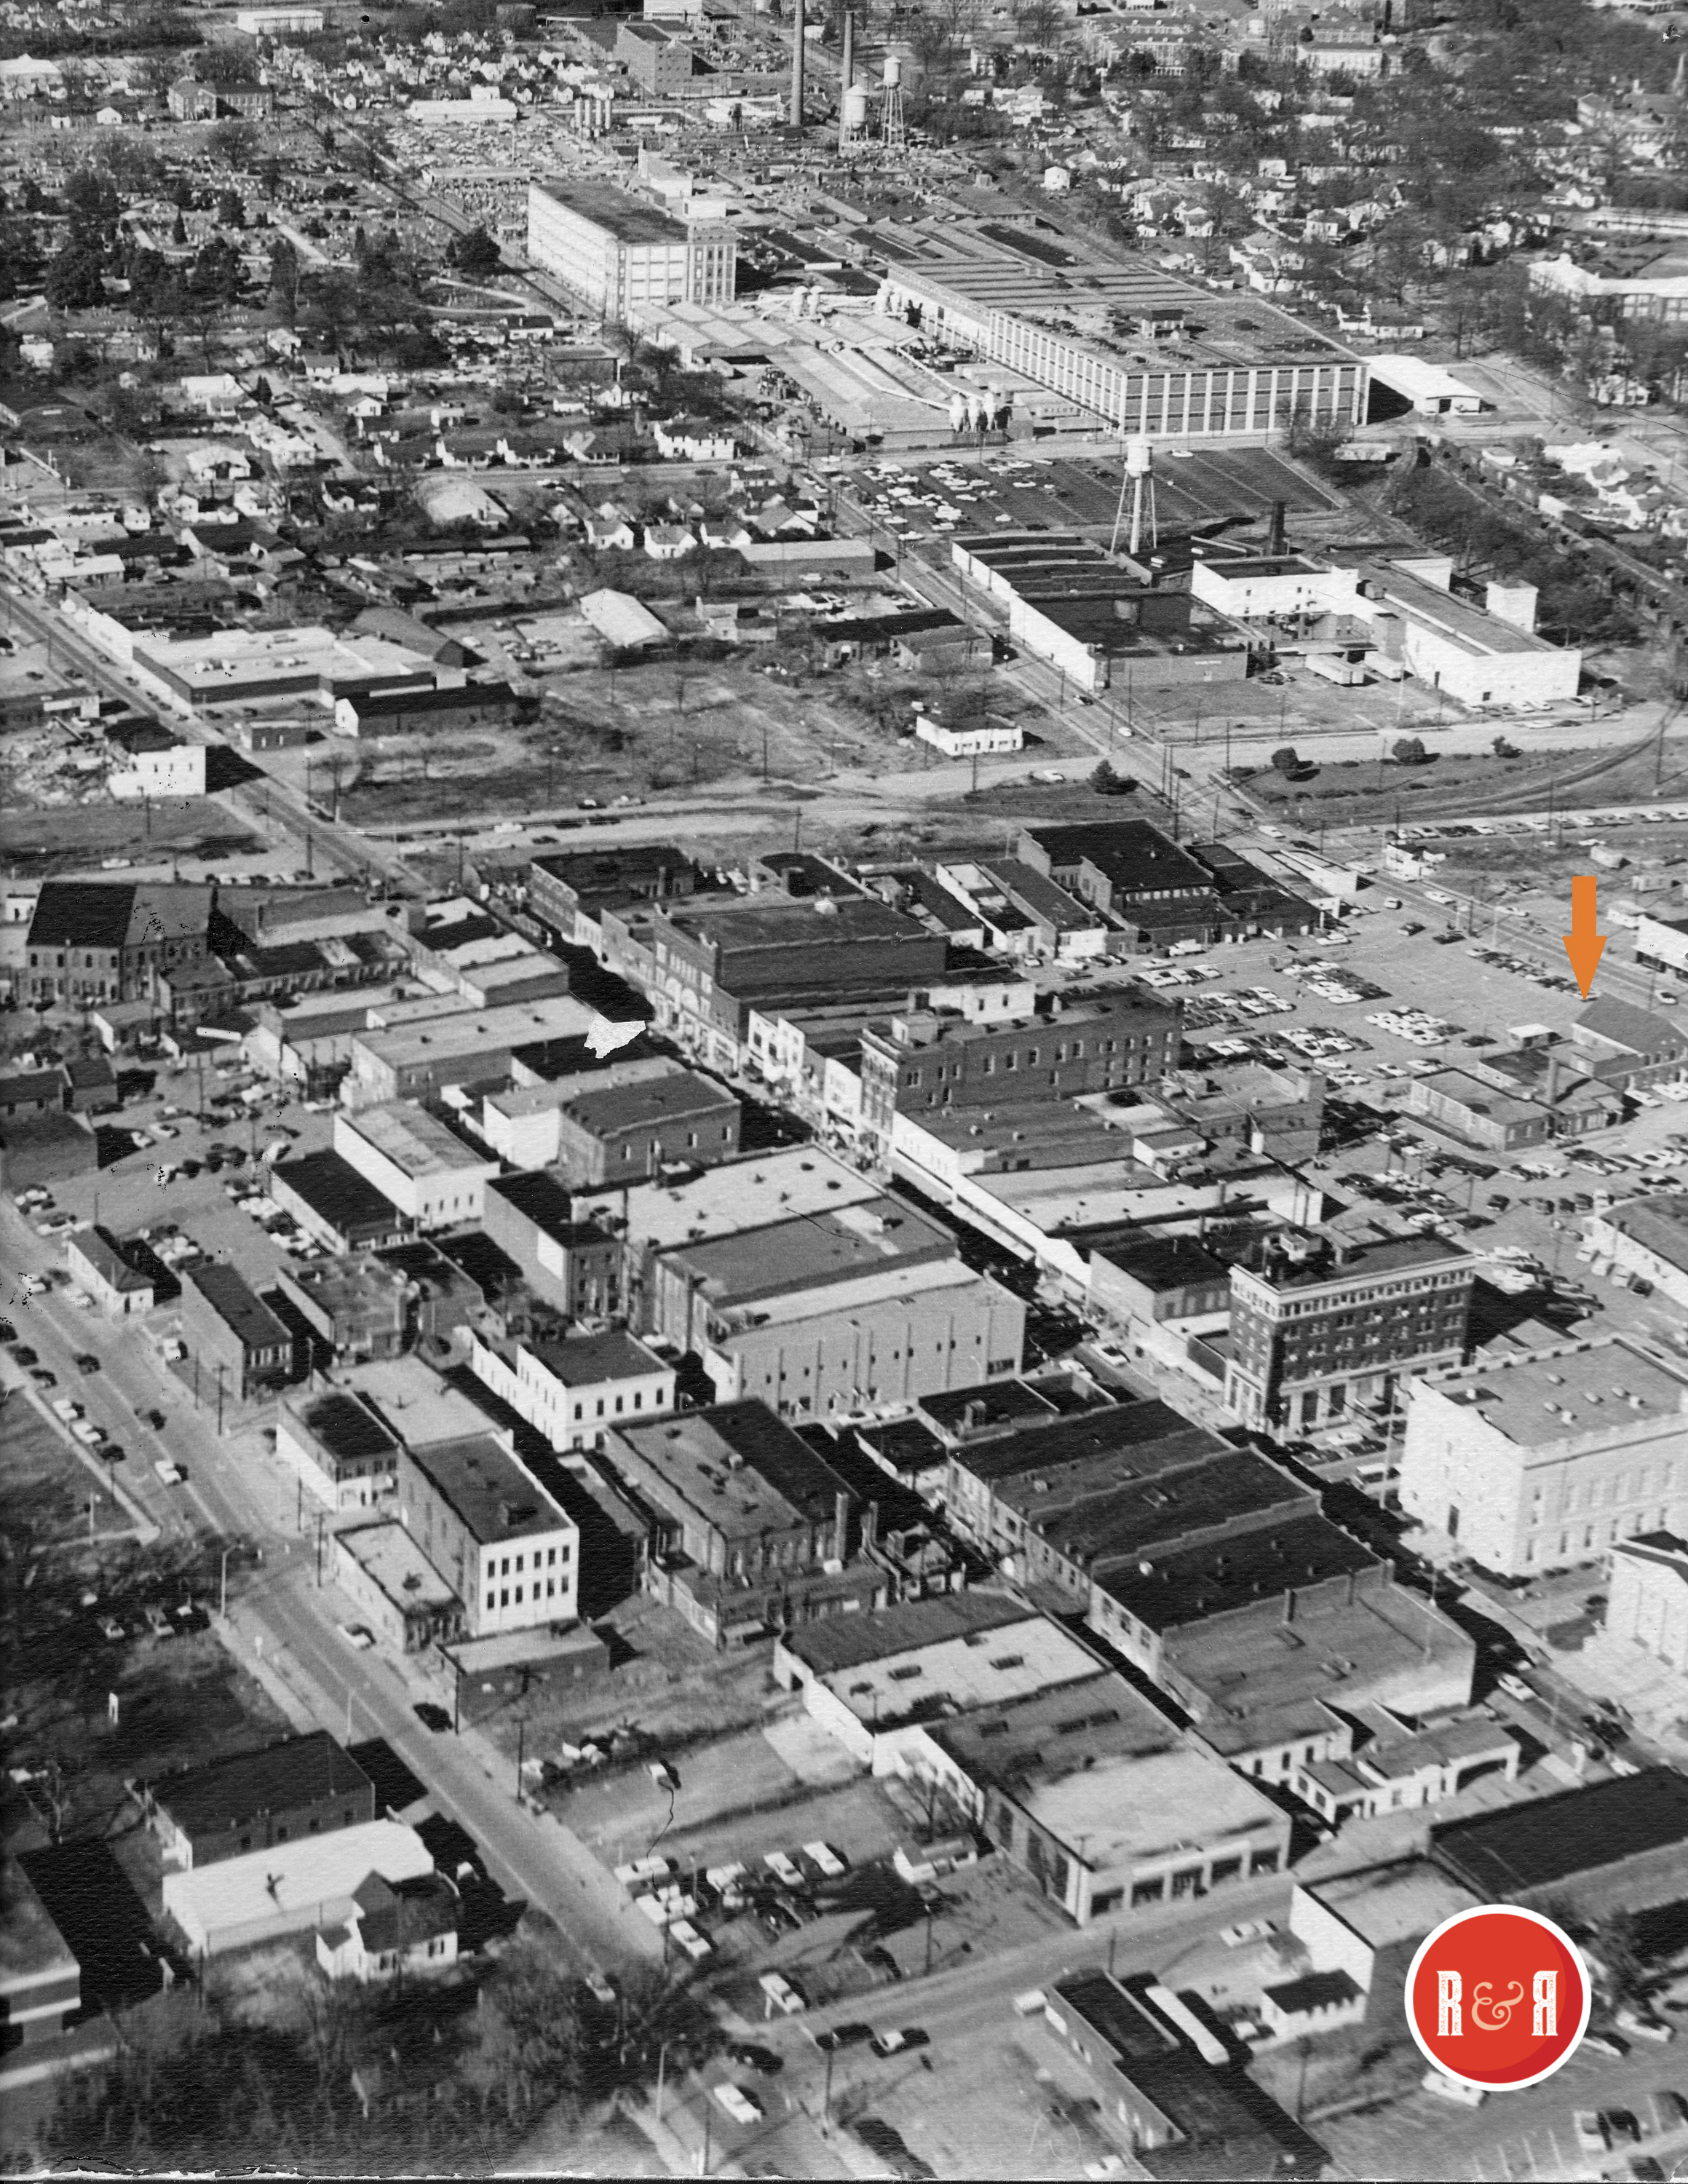 OLD RH FIRE AND POLICE DEPARTMENTS - AERIAL IMAGE